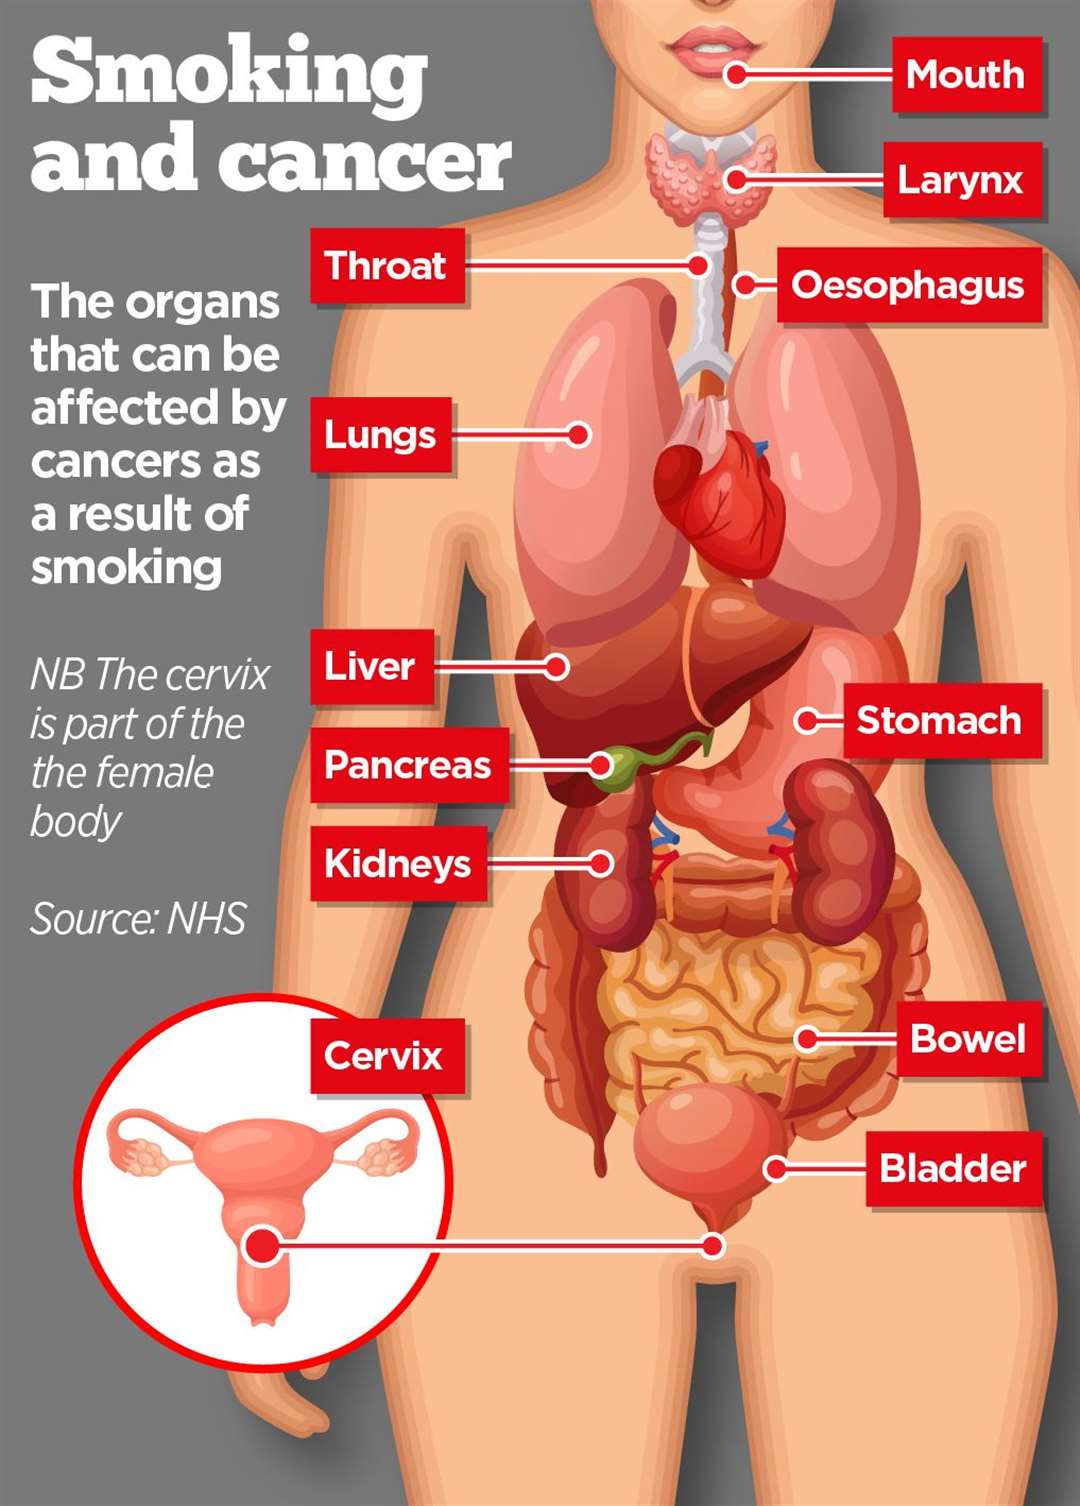 Types of cancer caused by smoking. Source: NHS